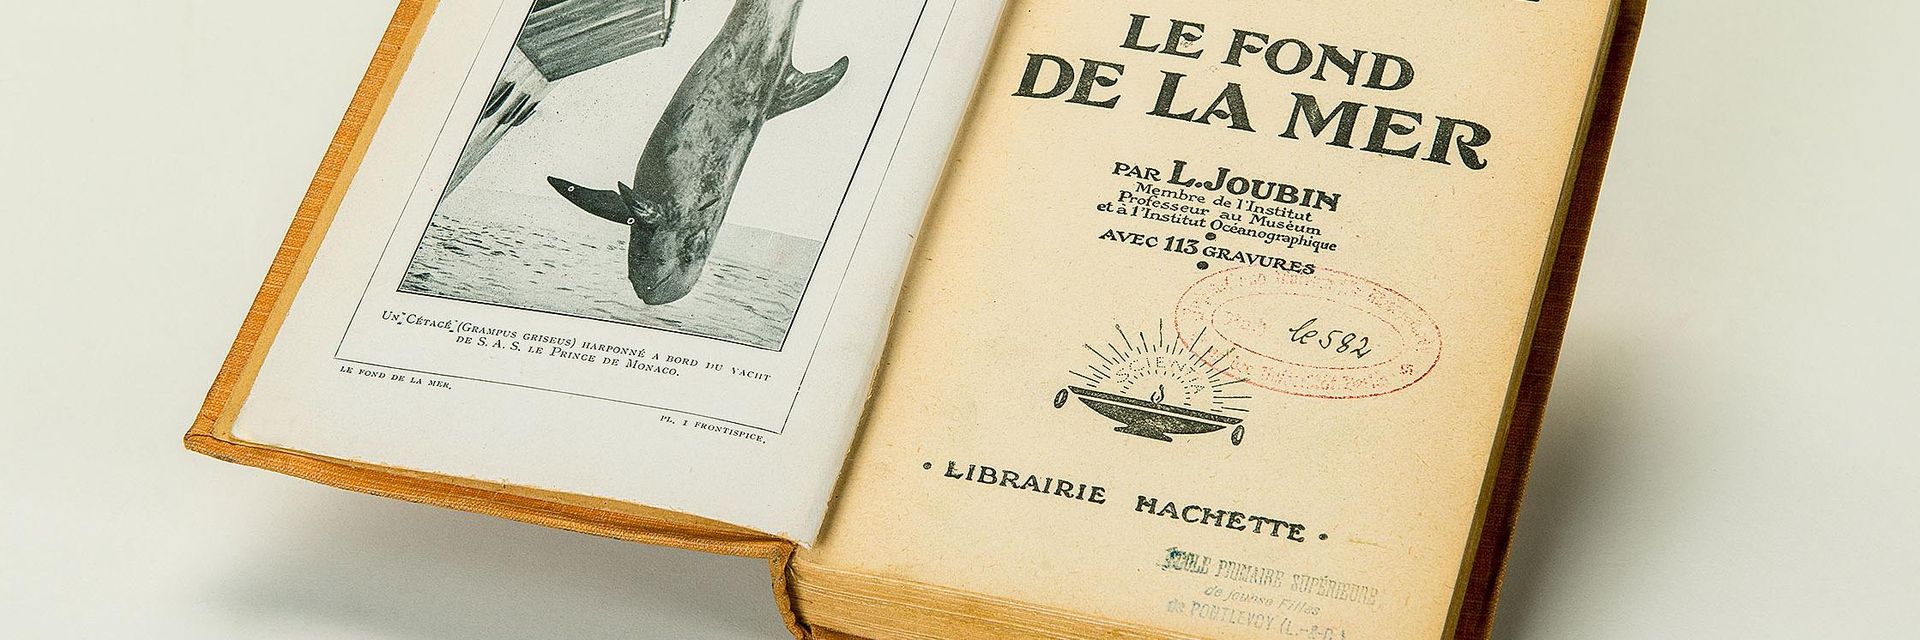 Two library stamp imprints are seen on the title page of an open book. They are centered under the heading "Le fond de la mer," which is French for "The Seabed".